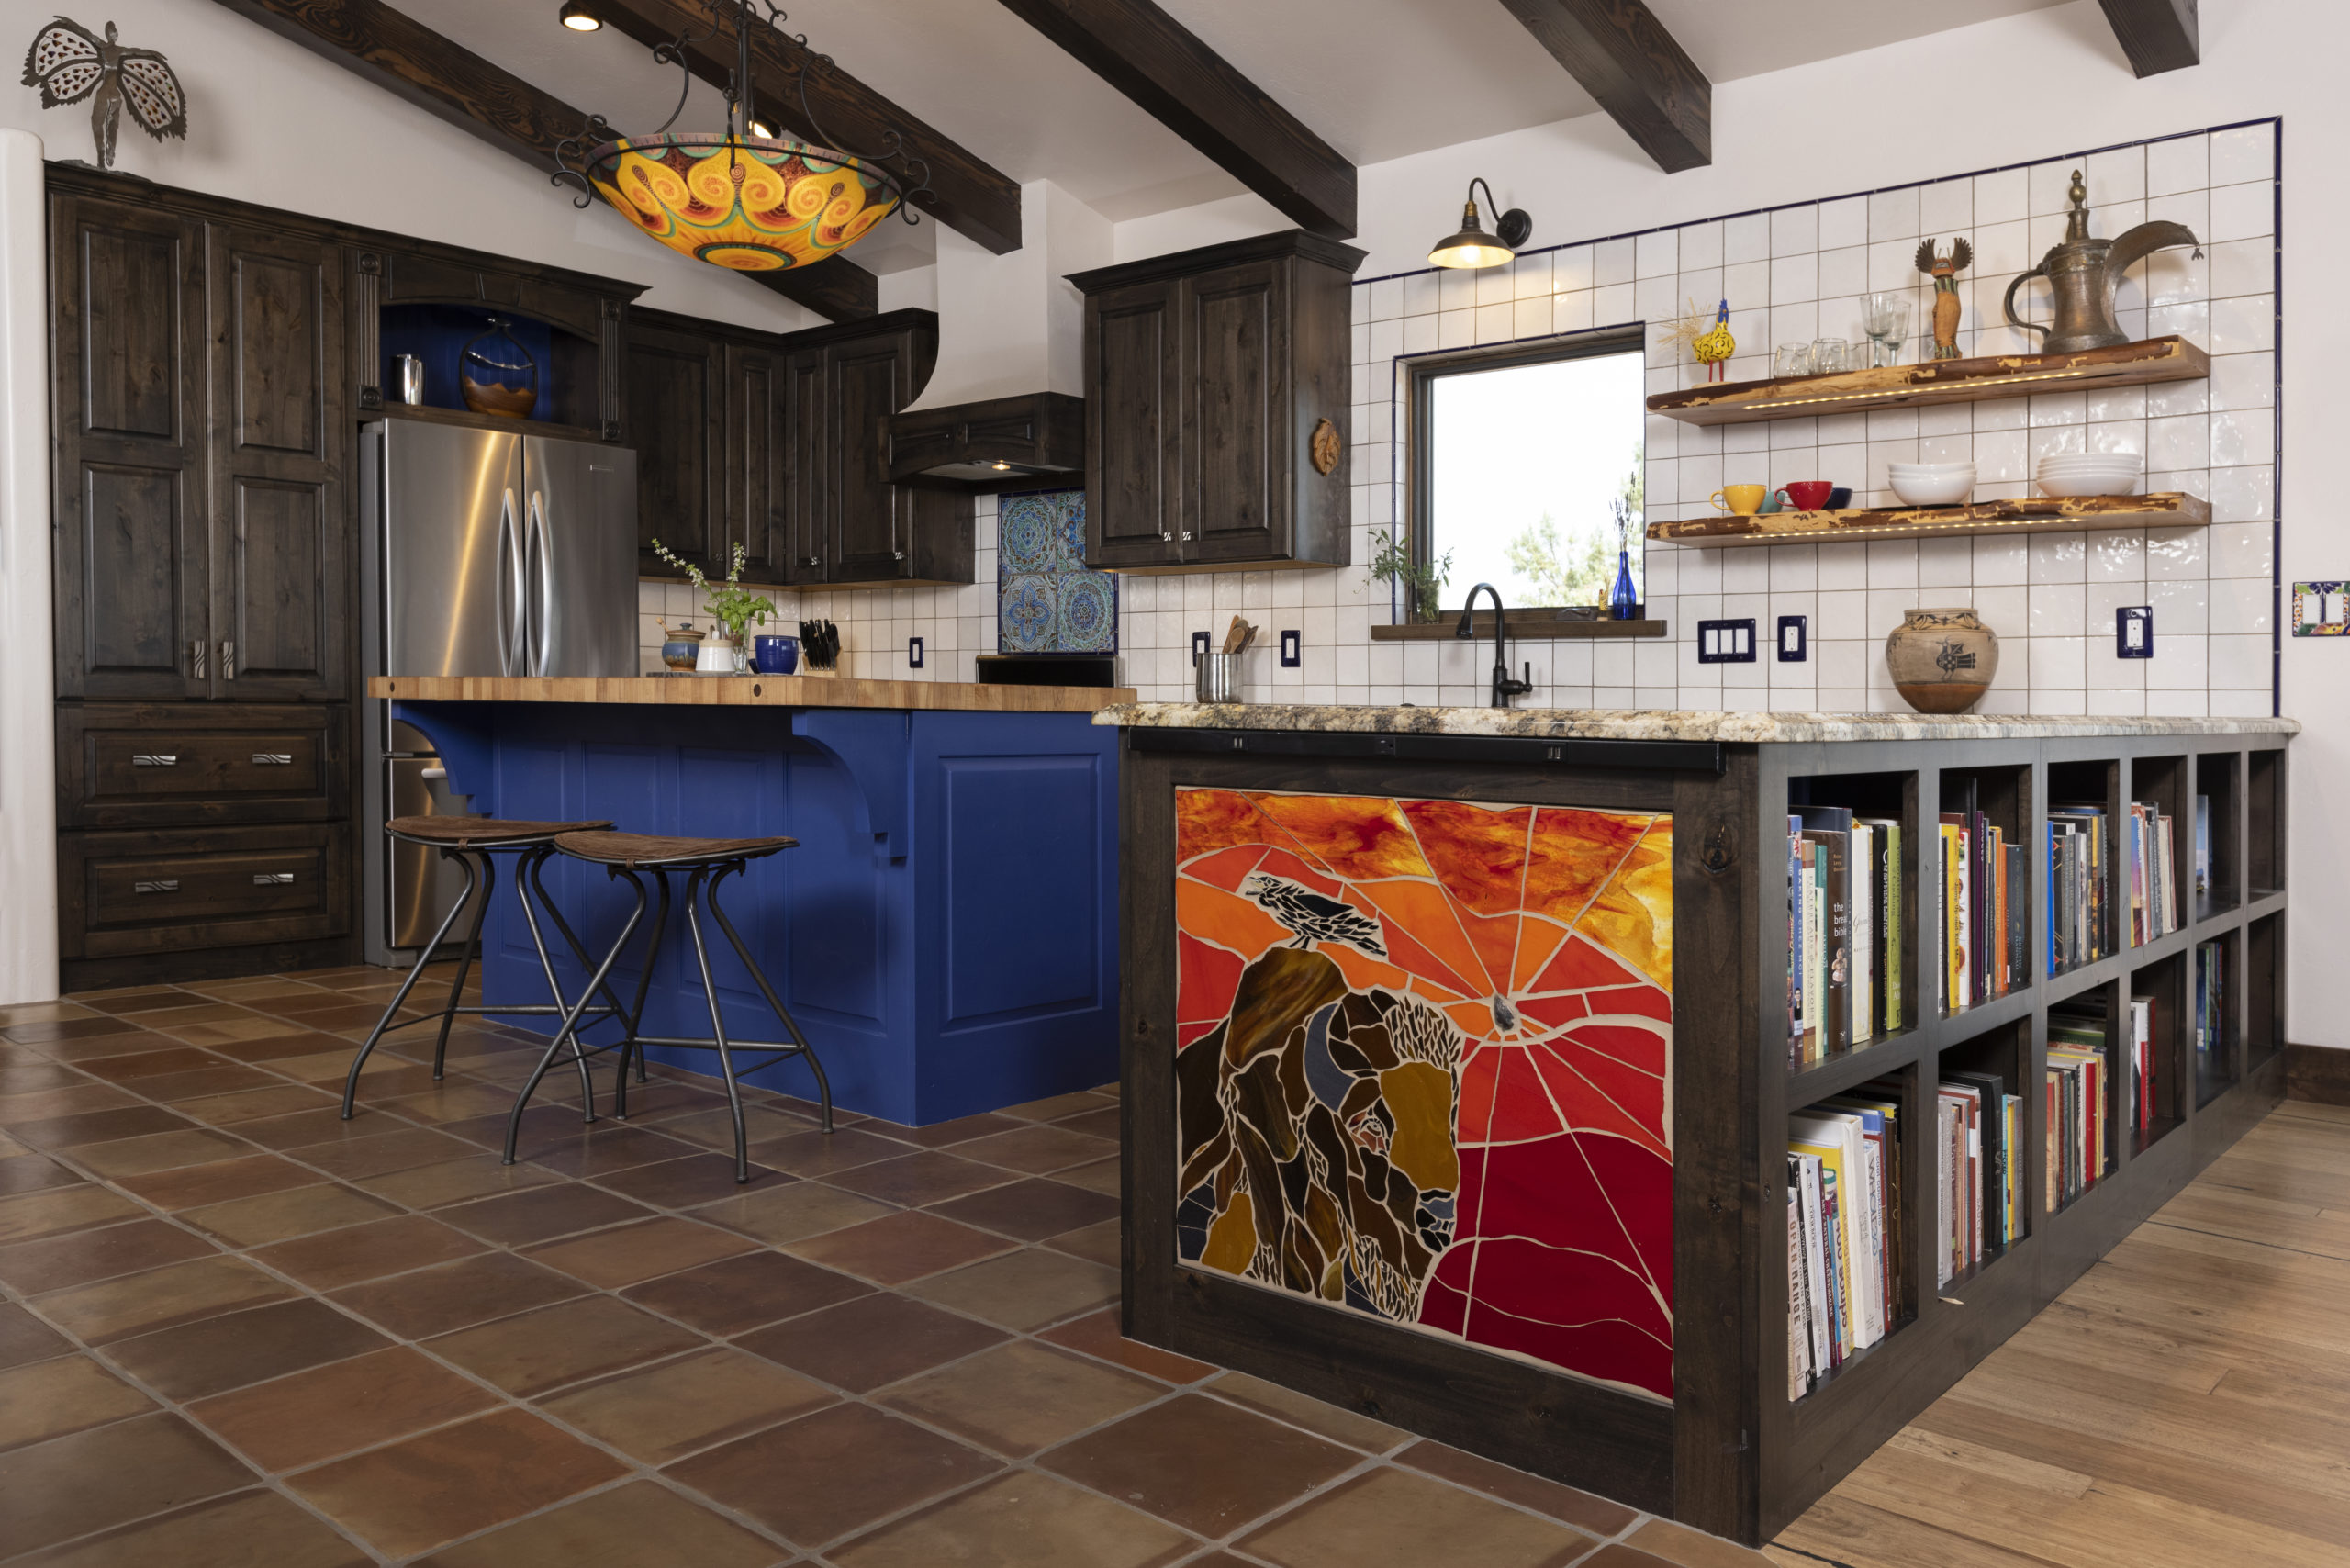 Kitchen with custom tile mosaic buffalo, painted island with butcher block, custom chandelier and built in bookshelves